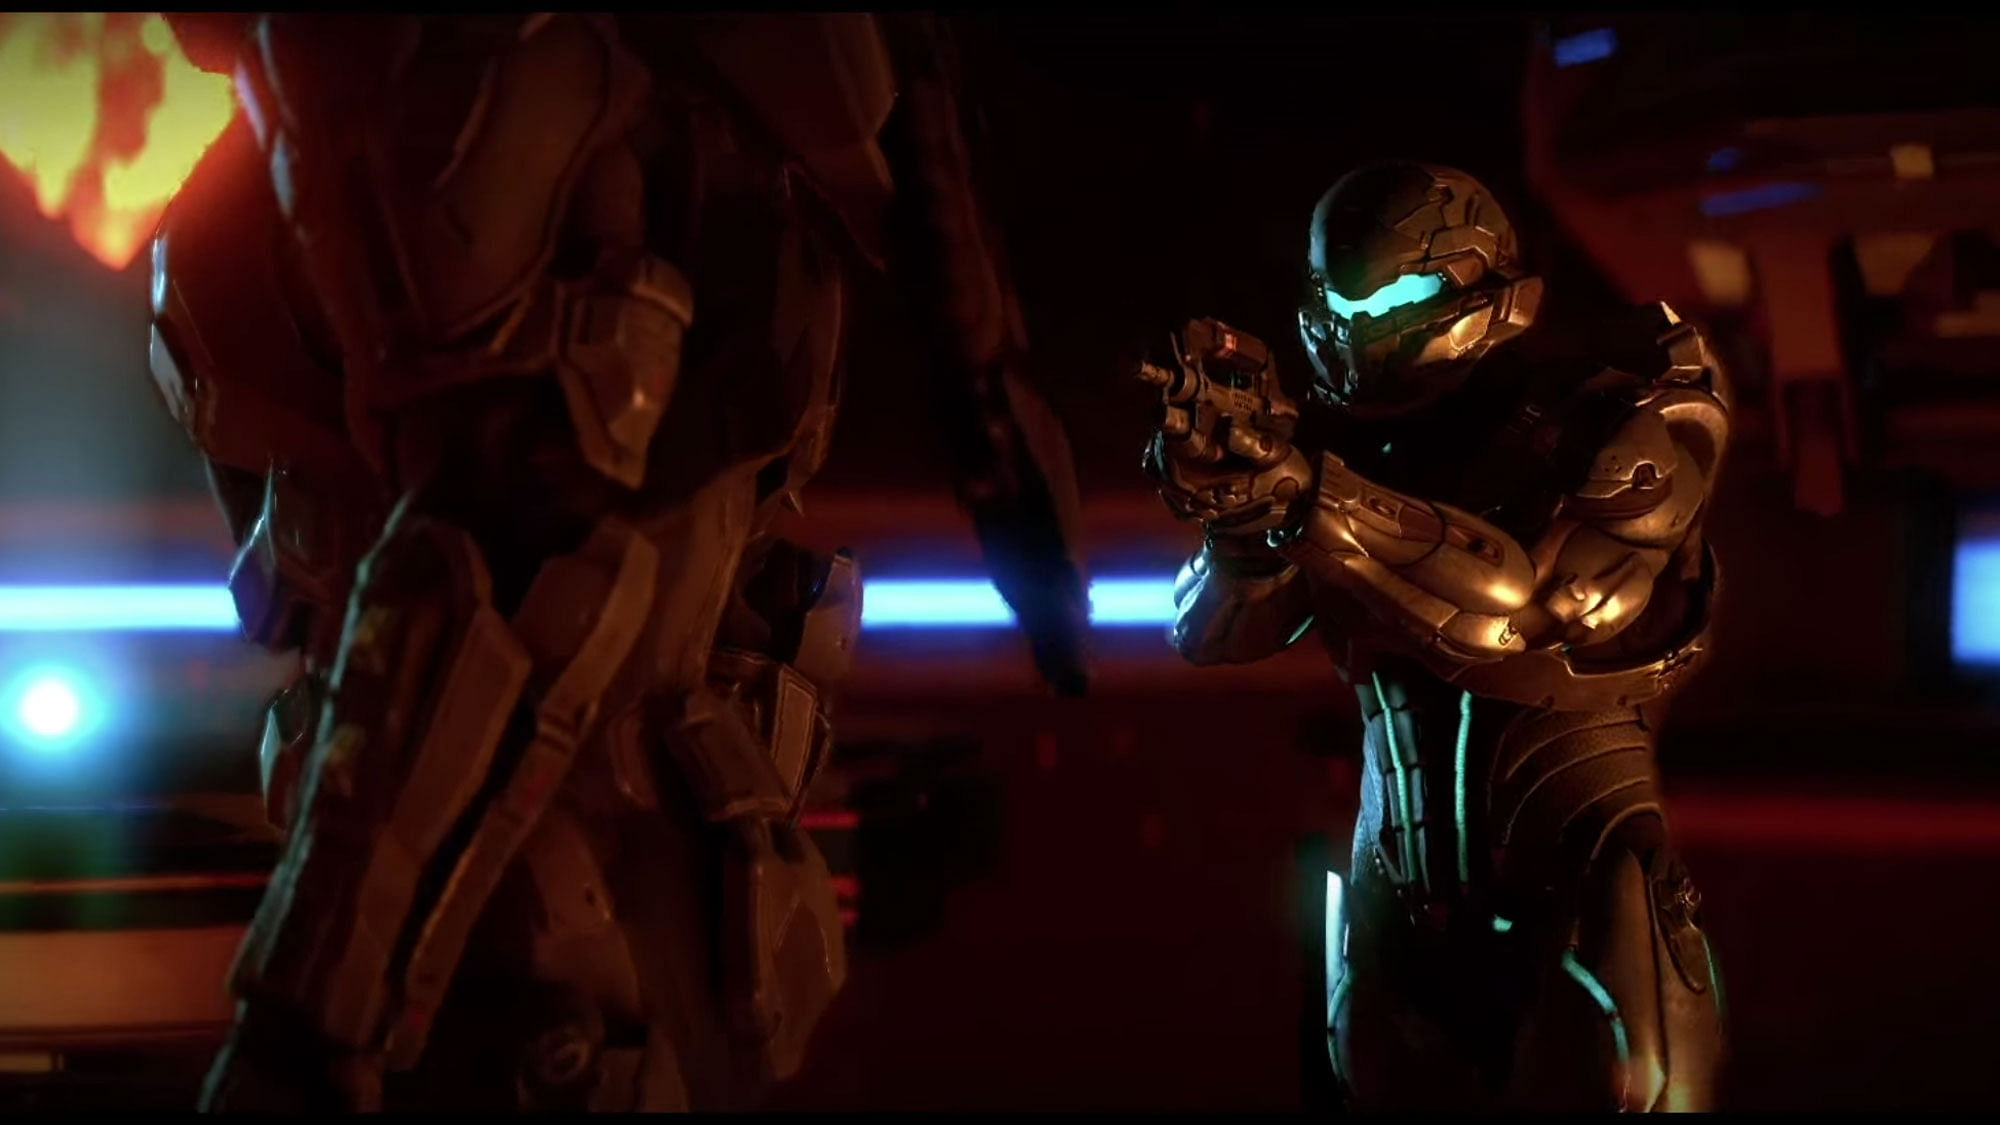 Halo 5: Guardians review: Everyone's a hero, no one's a hero